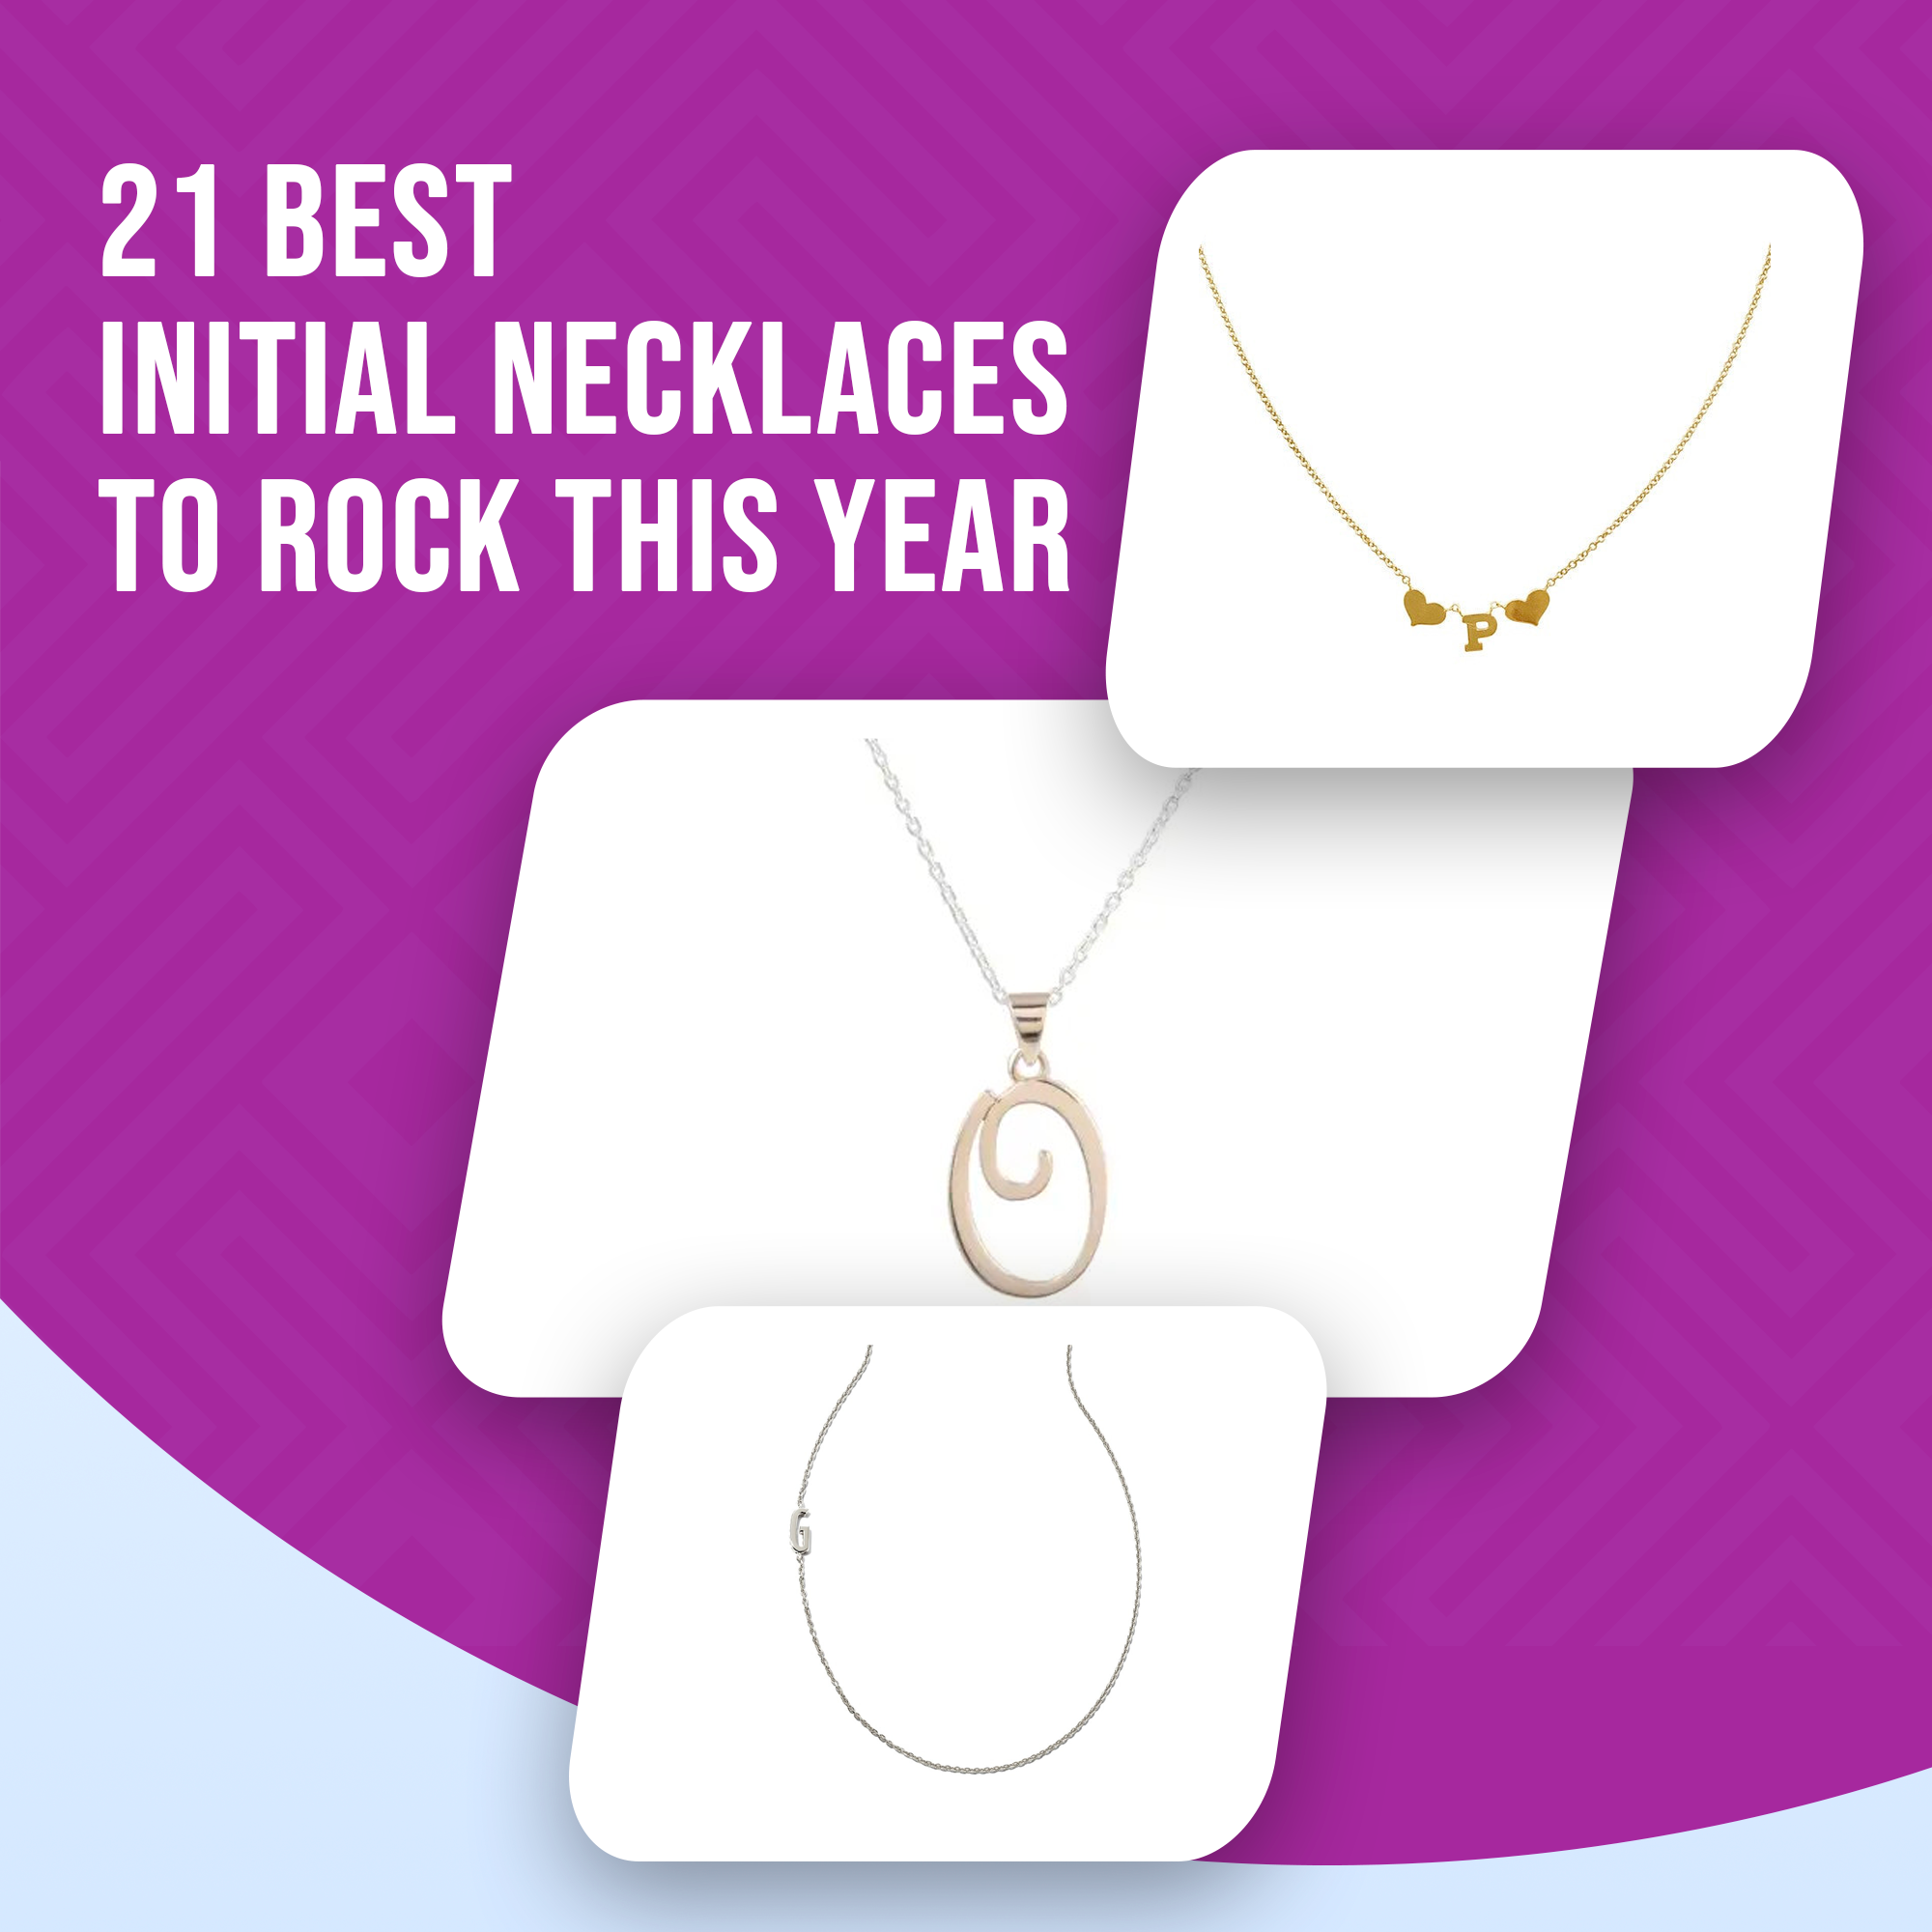 21 Best Initial Necklaces To Rock This Year